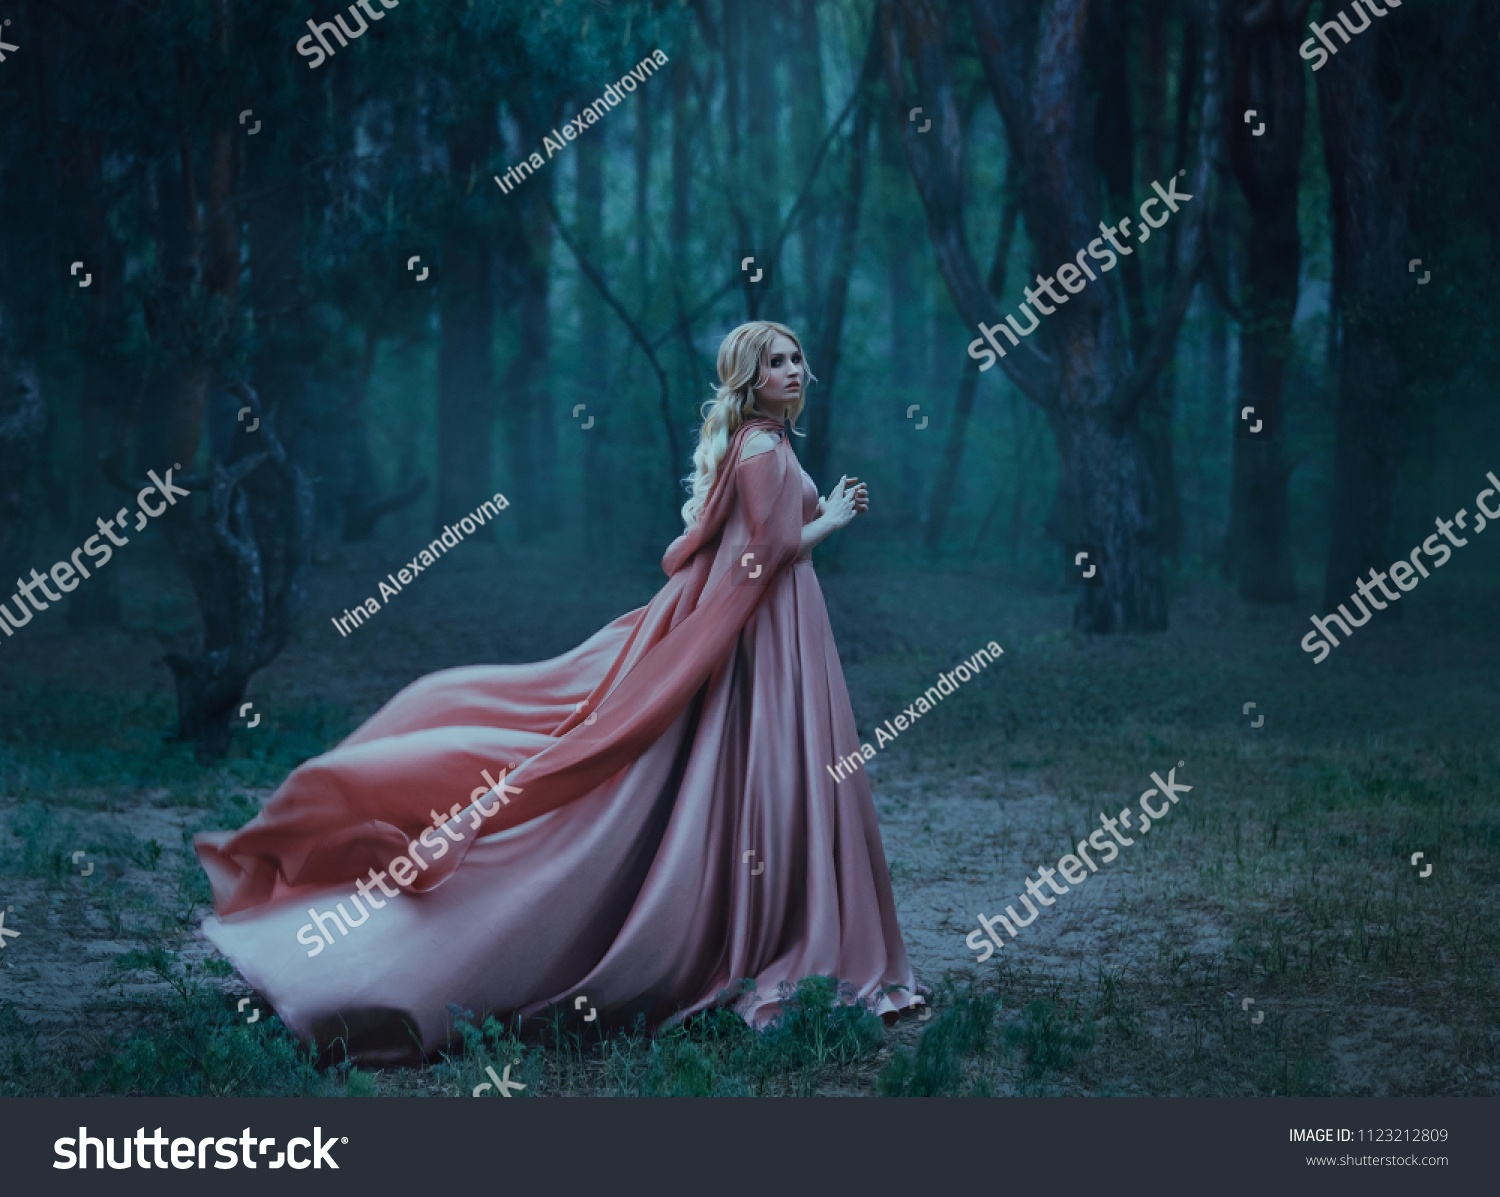 A mysterious blonde girl in a long pink dress with a train and a raincoat that flutters in the wind. The wizard leaves in a forest covered with fog. A background of trees with a haze away. Art photo #1123212809